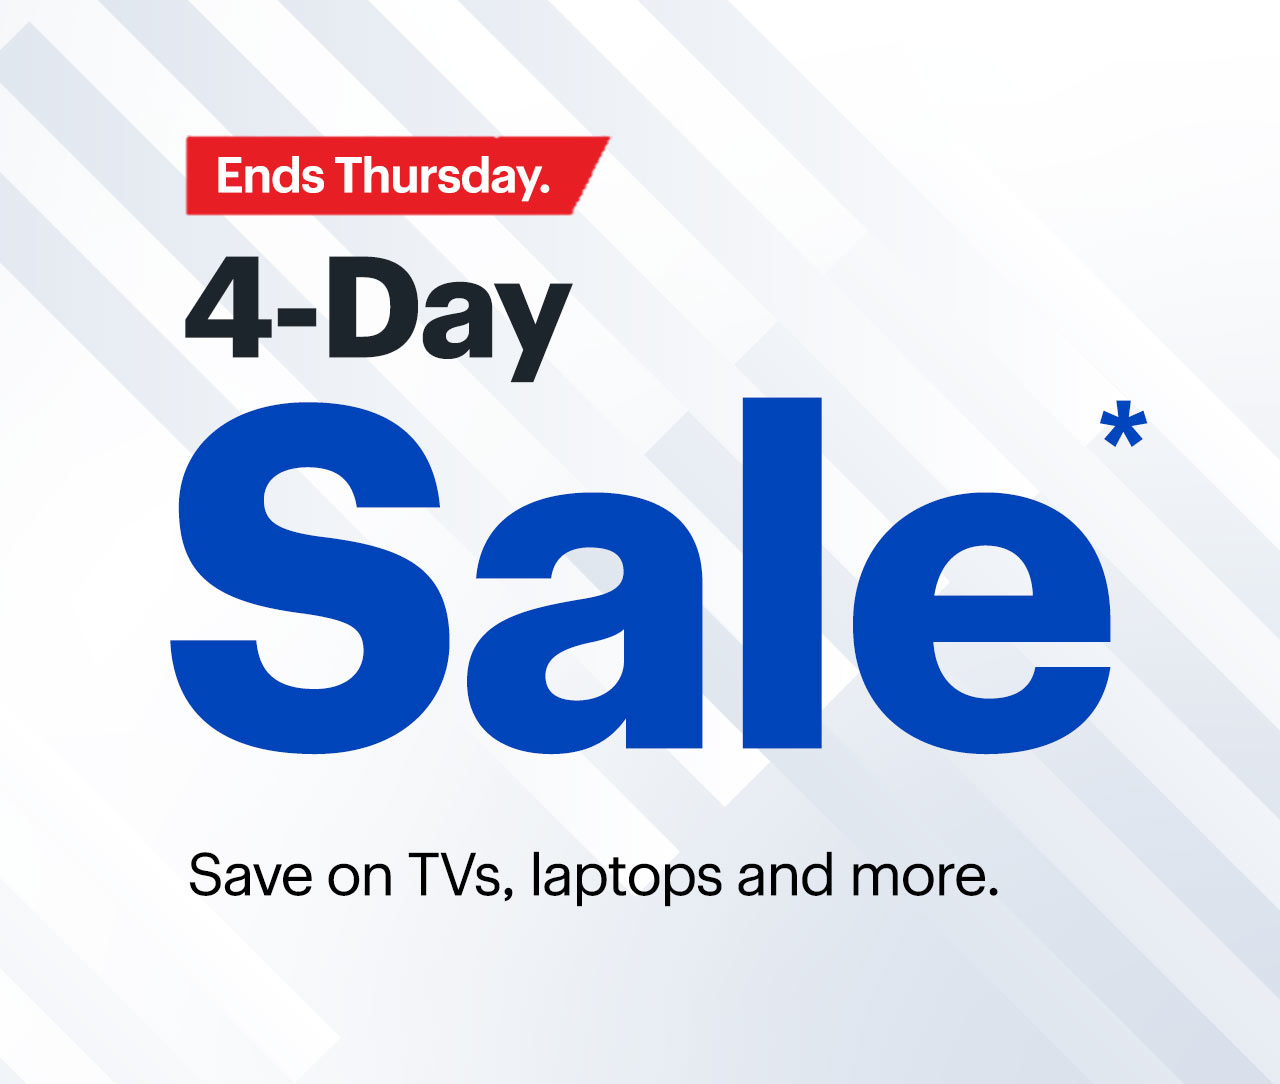 4-Day Sale ends Thursday. Save on TVs, laptops and more. Reference disclaimer.